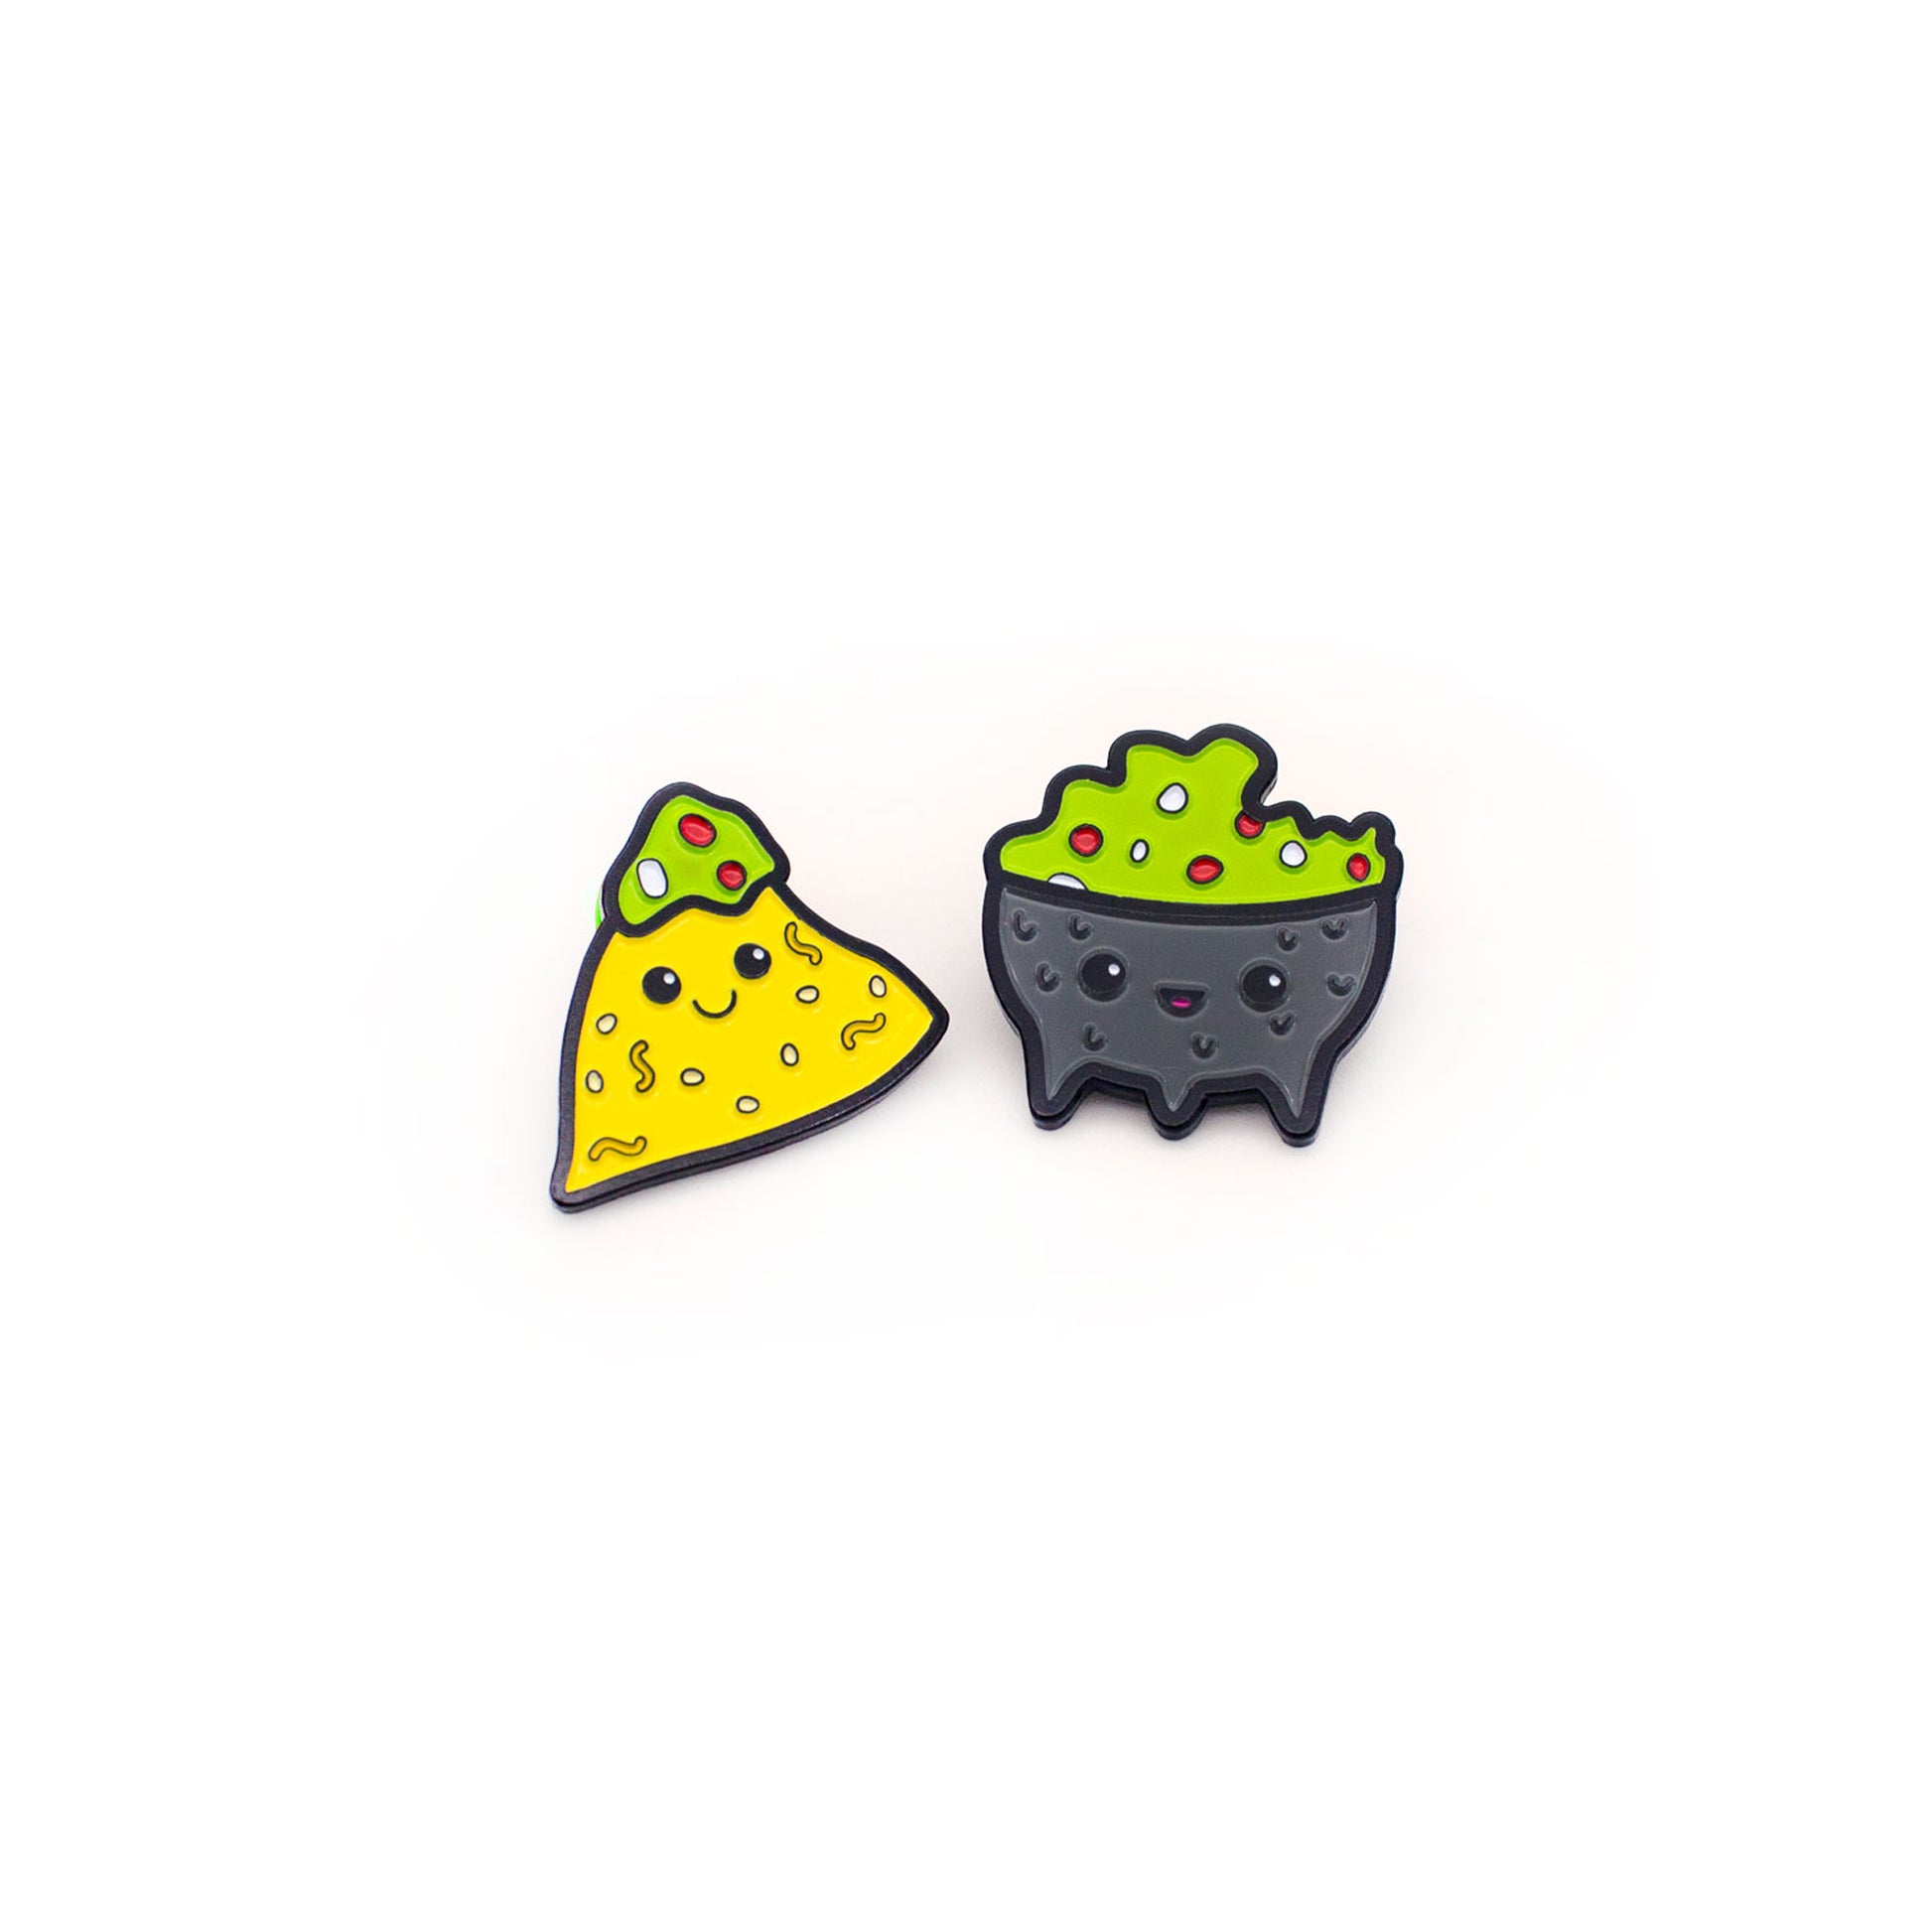 Chip and Guac enamel pins on white background